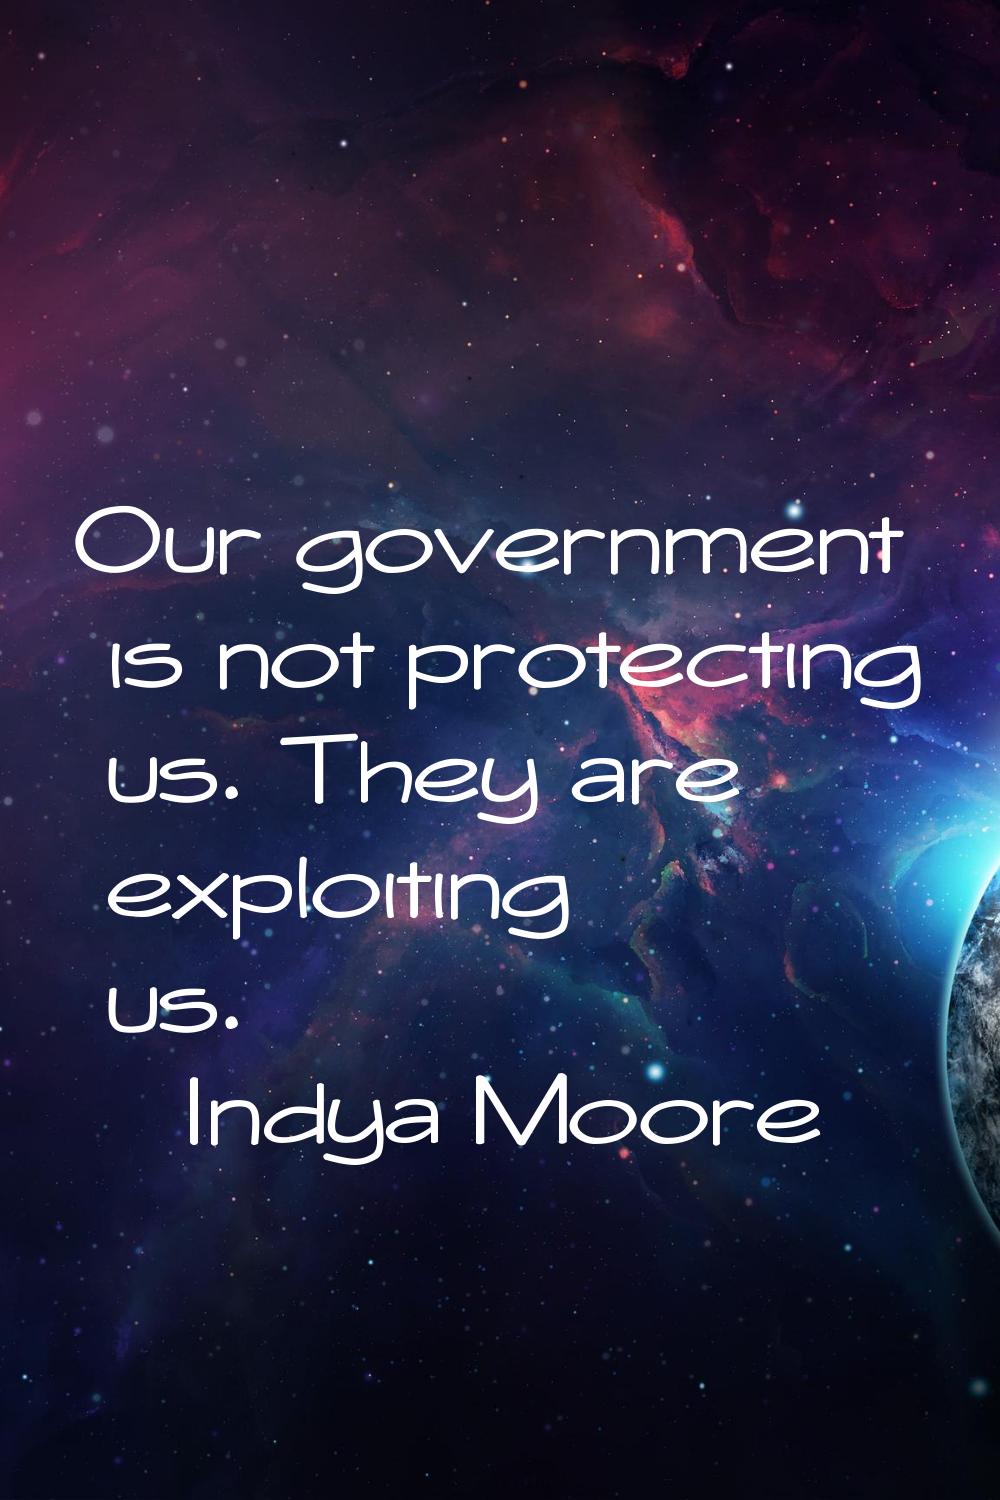 Our government is not protecting us. They are exploiting us.